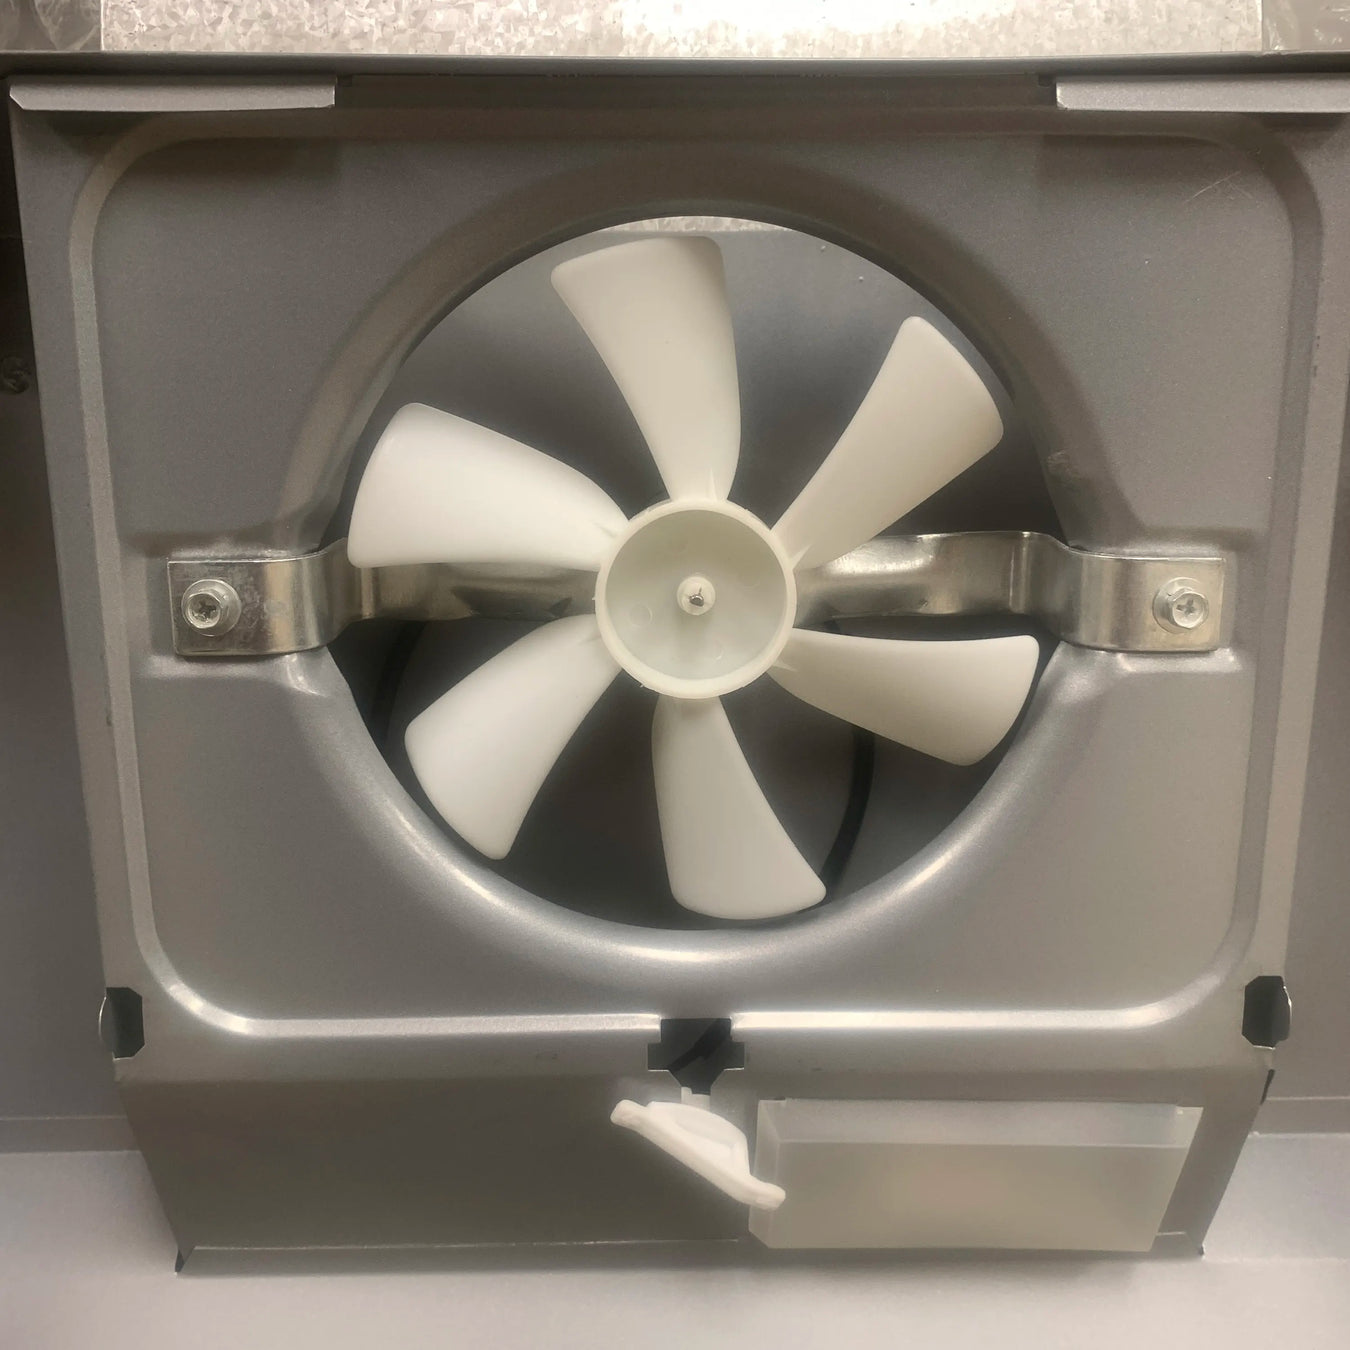 Used RV Range Hood Fan - Replacement Parts